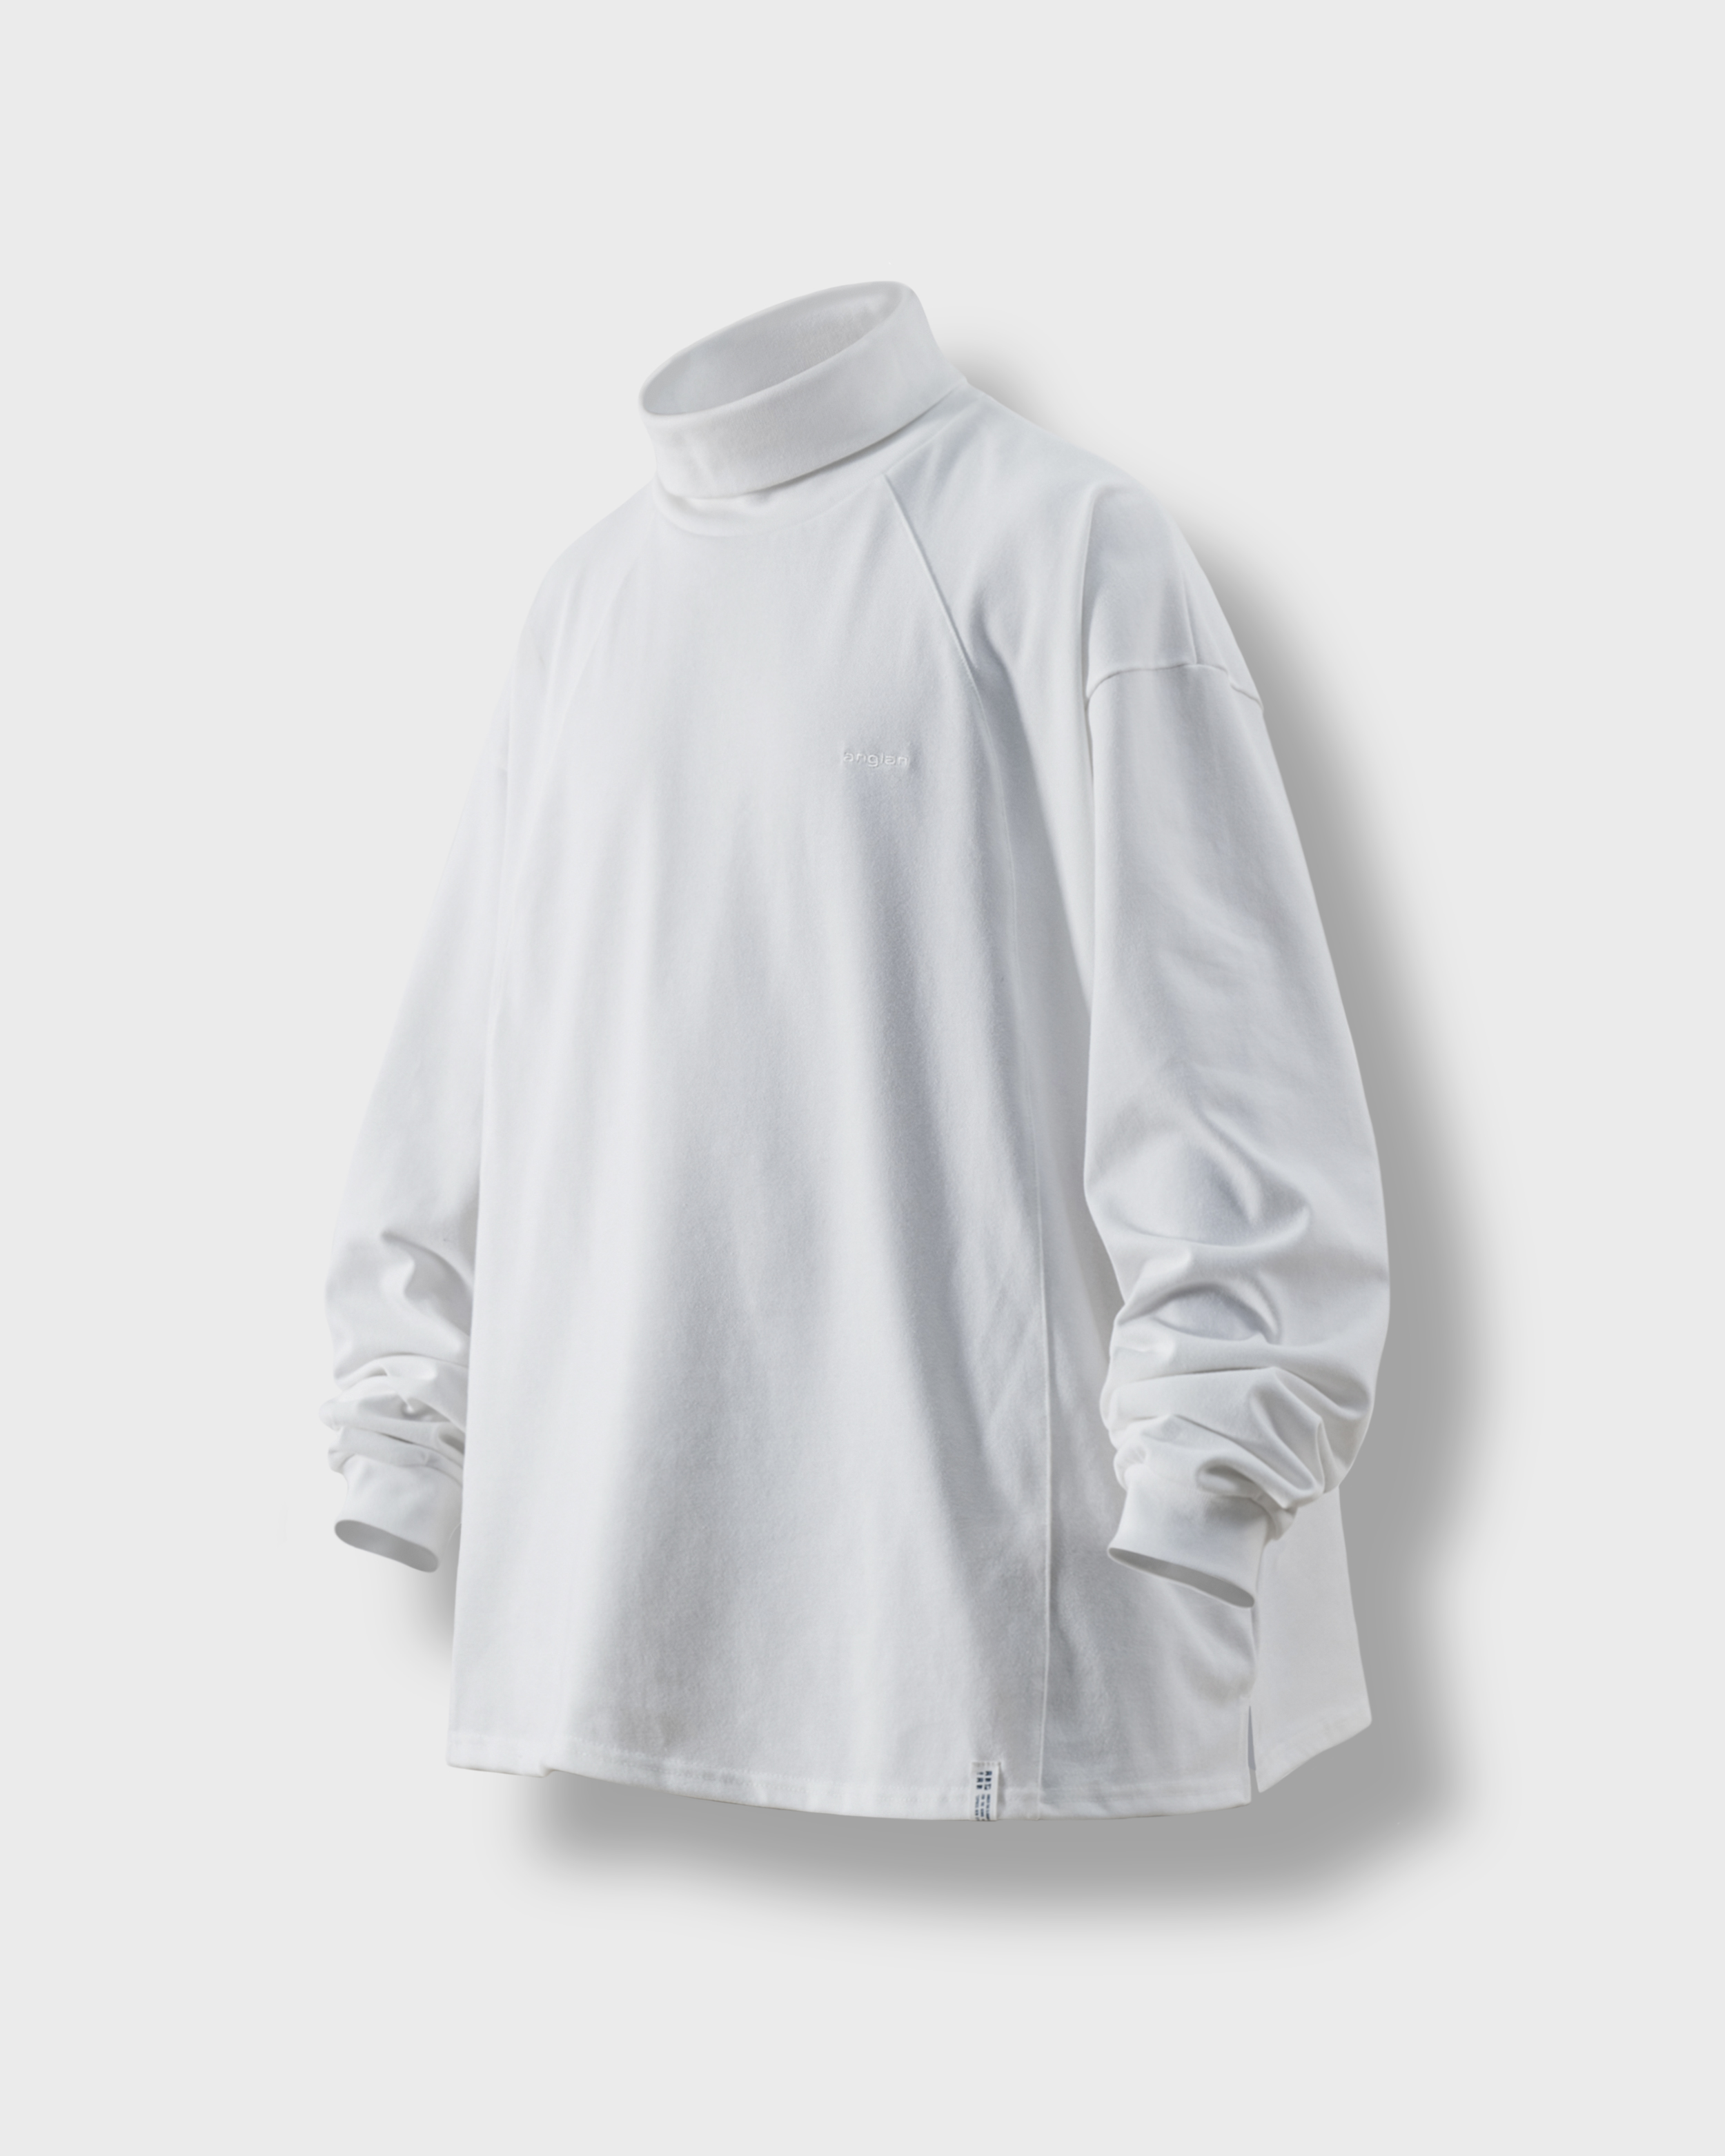 [AG] Oval Incision Turtle Neck Long Sleeve - White